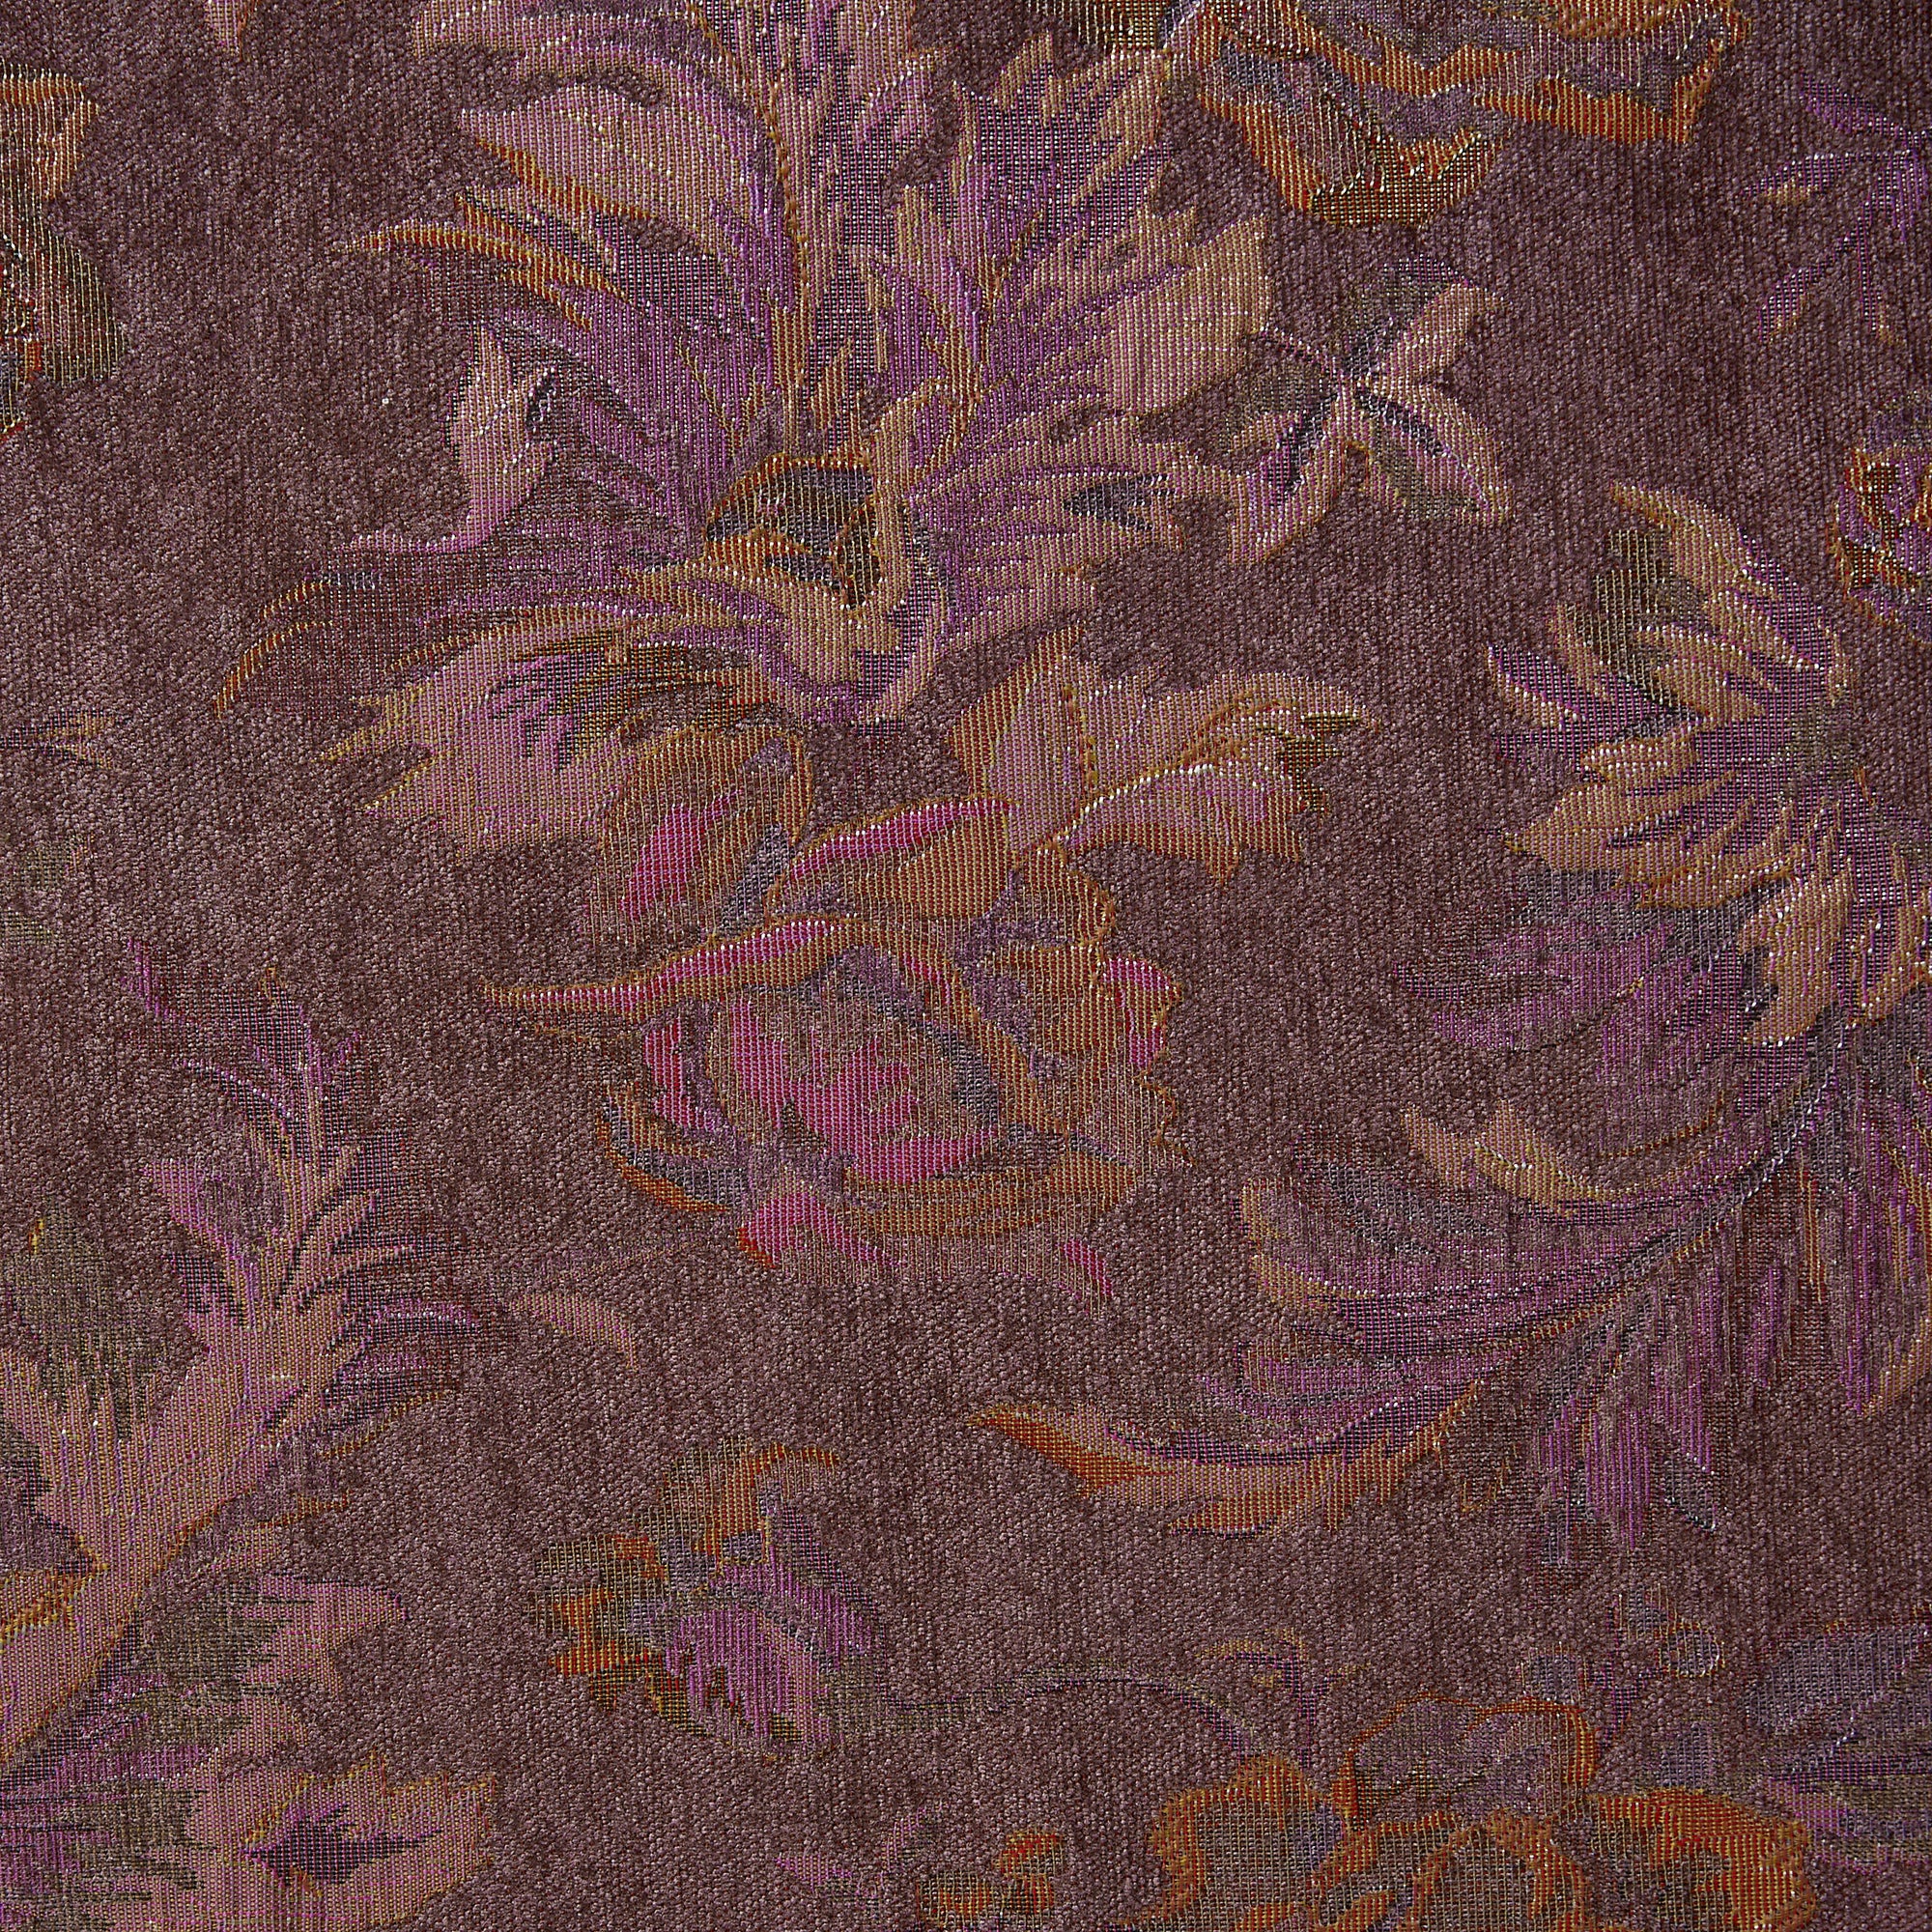 Displaying Donna a purple fabric with colored shades leafy floral heavy weight polyester and Rayon brocade with lurex 